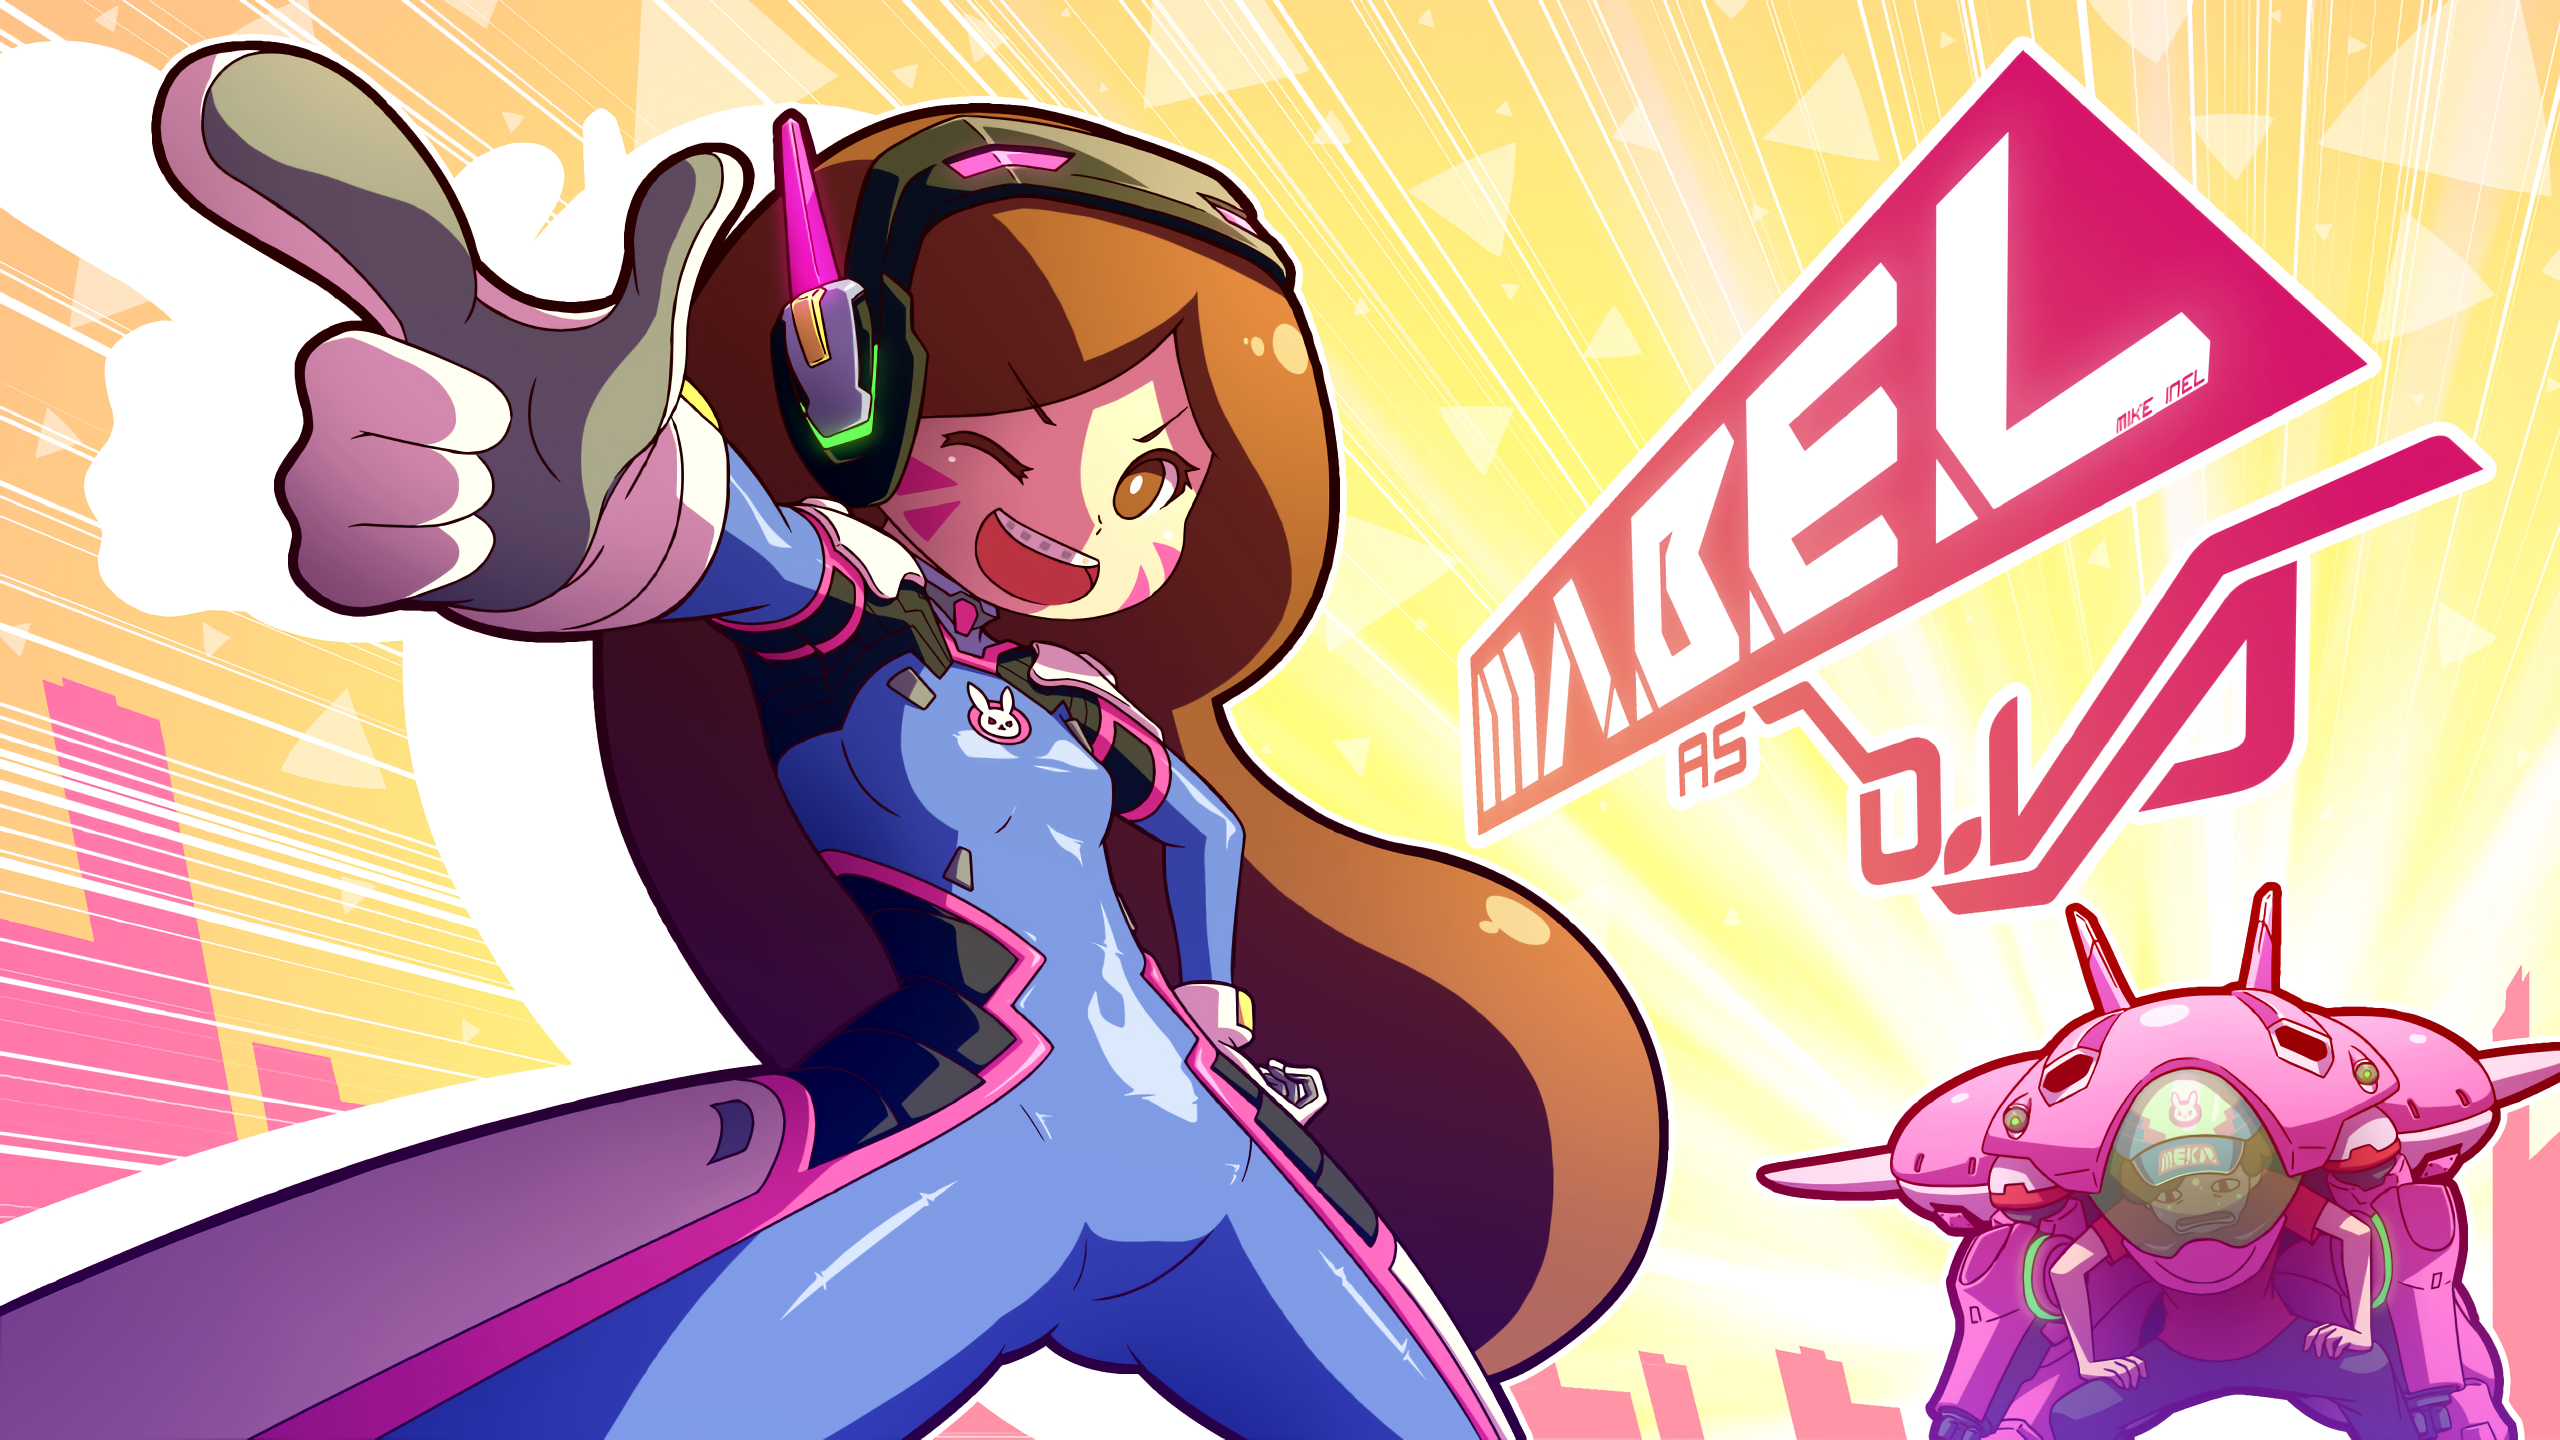 Overwatch Gravity Falls Mabel Pines Stanley Pines Crossover 2560x1440